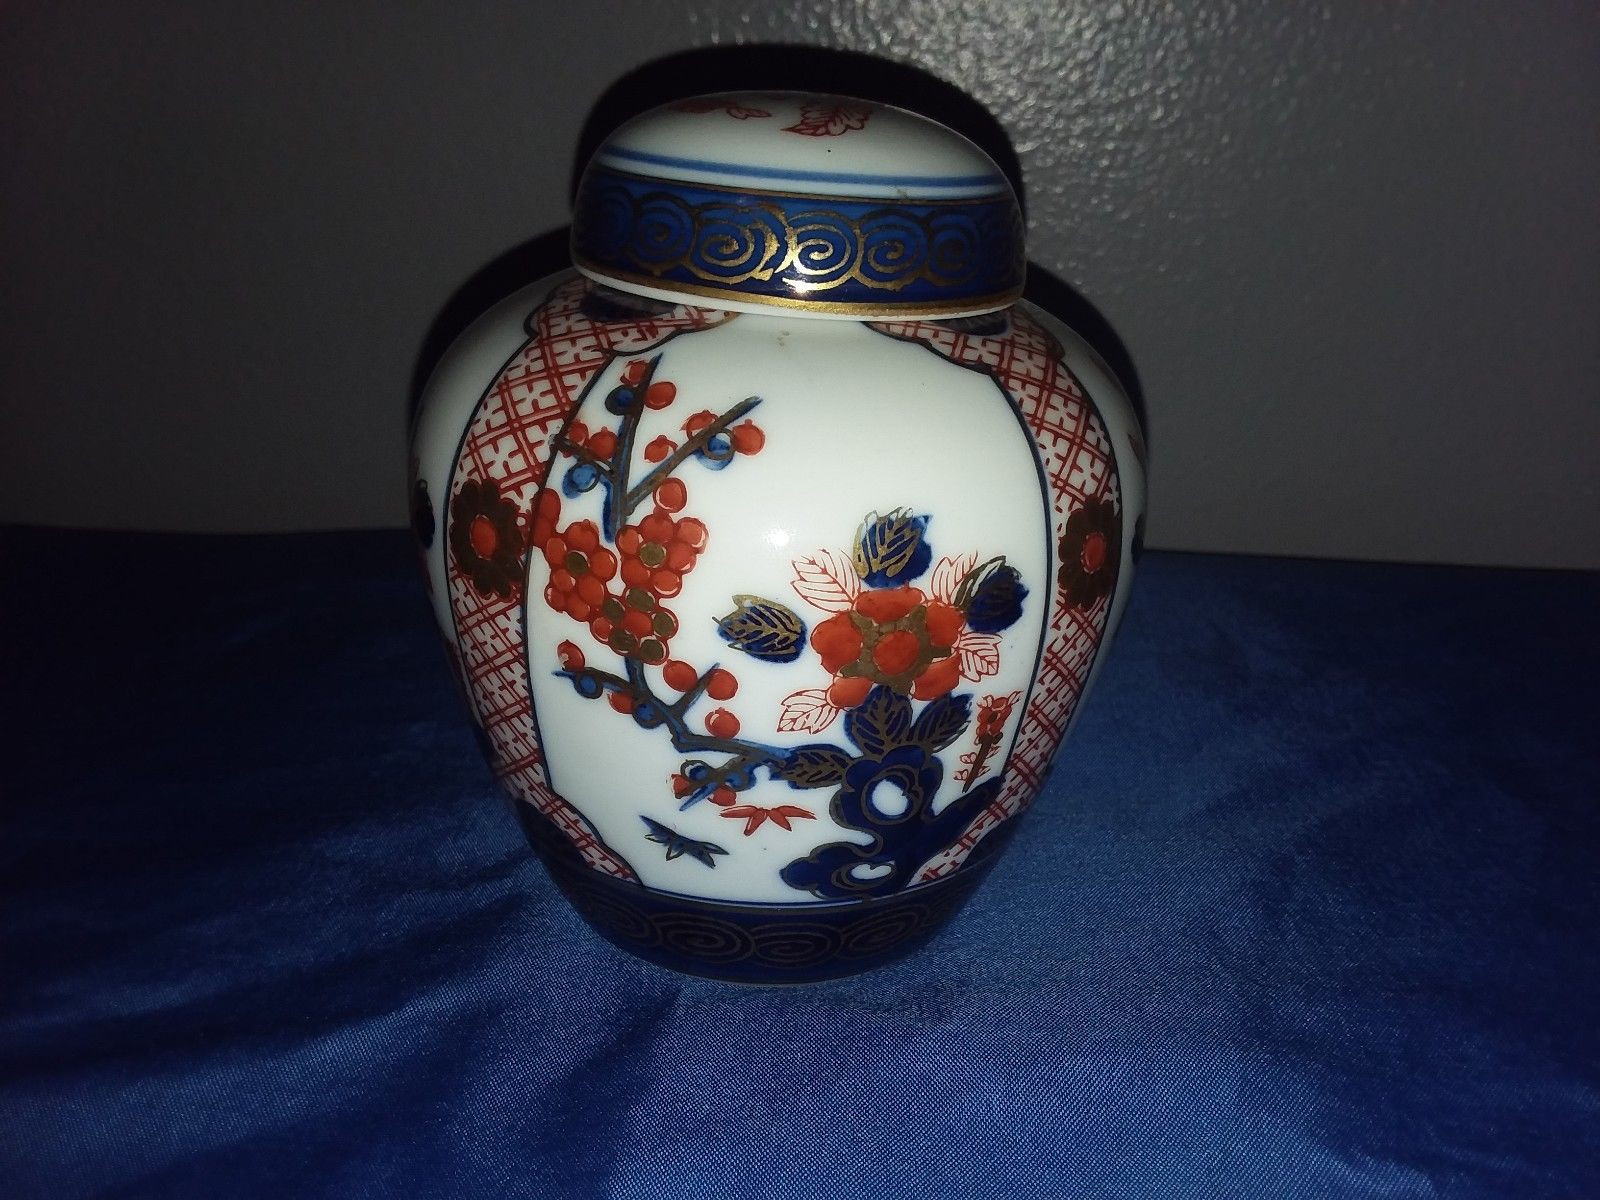 16 Cute Fine China Vase Made In Japan 2024 free download fine china vase made in japan of vintage ginger jar porcelain goldimari hand painted floral gold gilt with regard to 1 of 9only 1 available